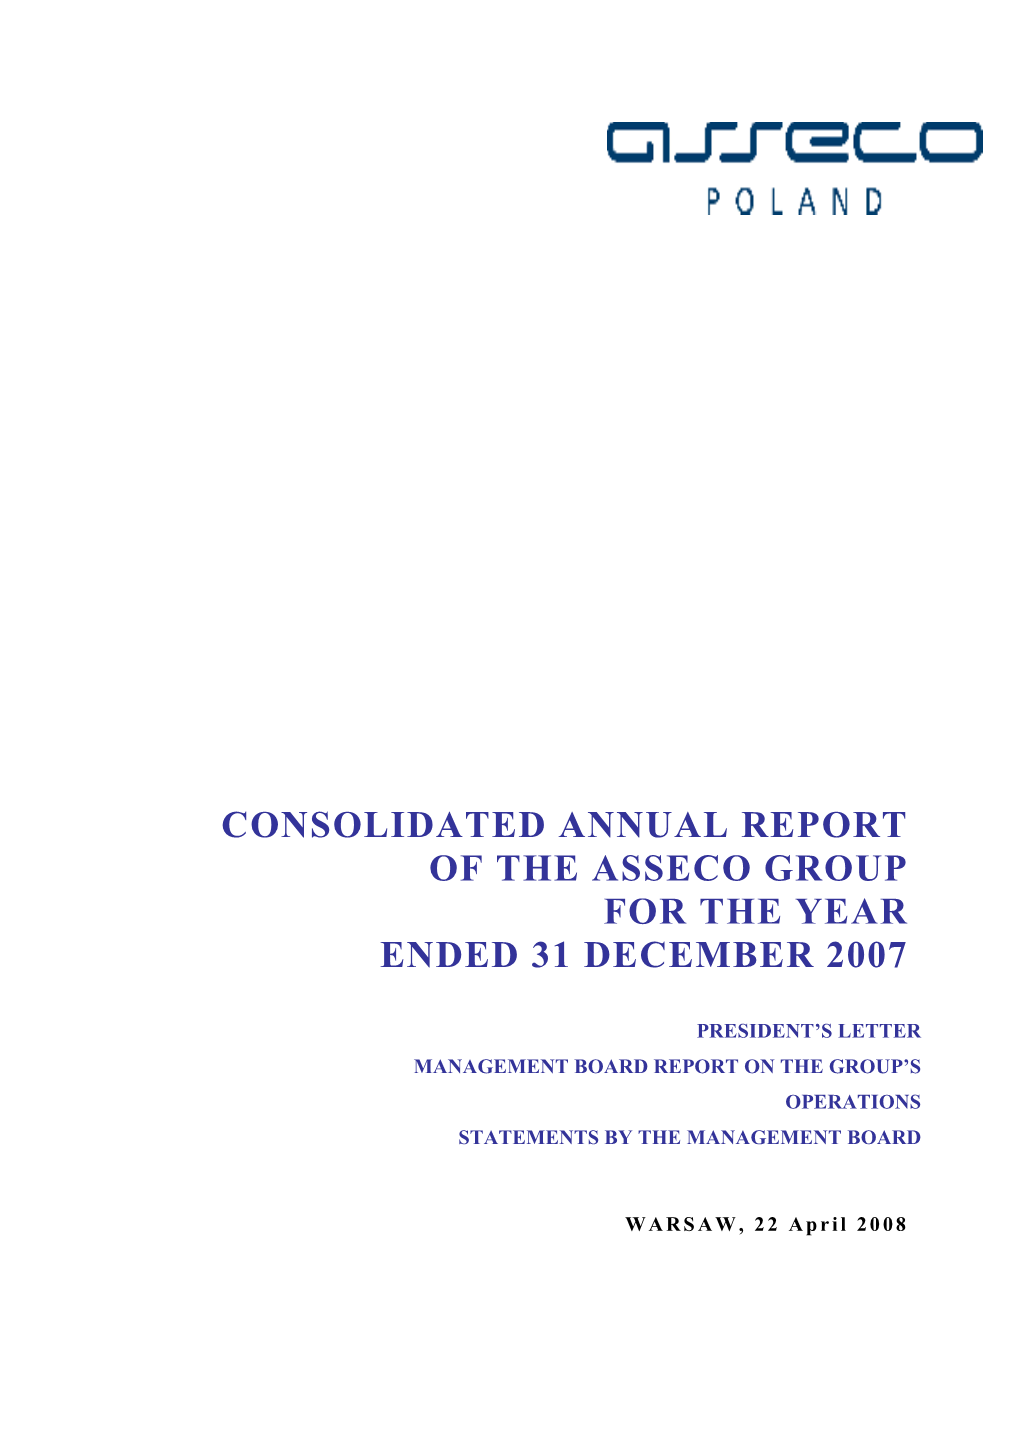 Consolidated Annual Report of the Asseco Group for the Year Ended 31 December 2007